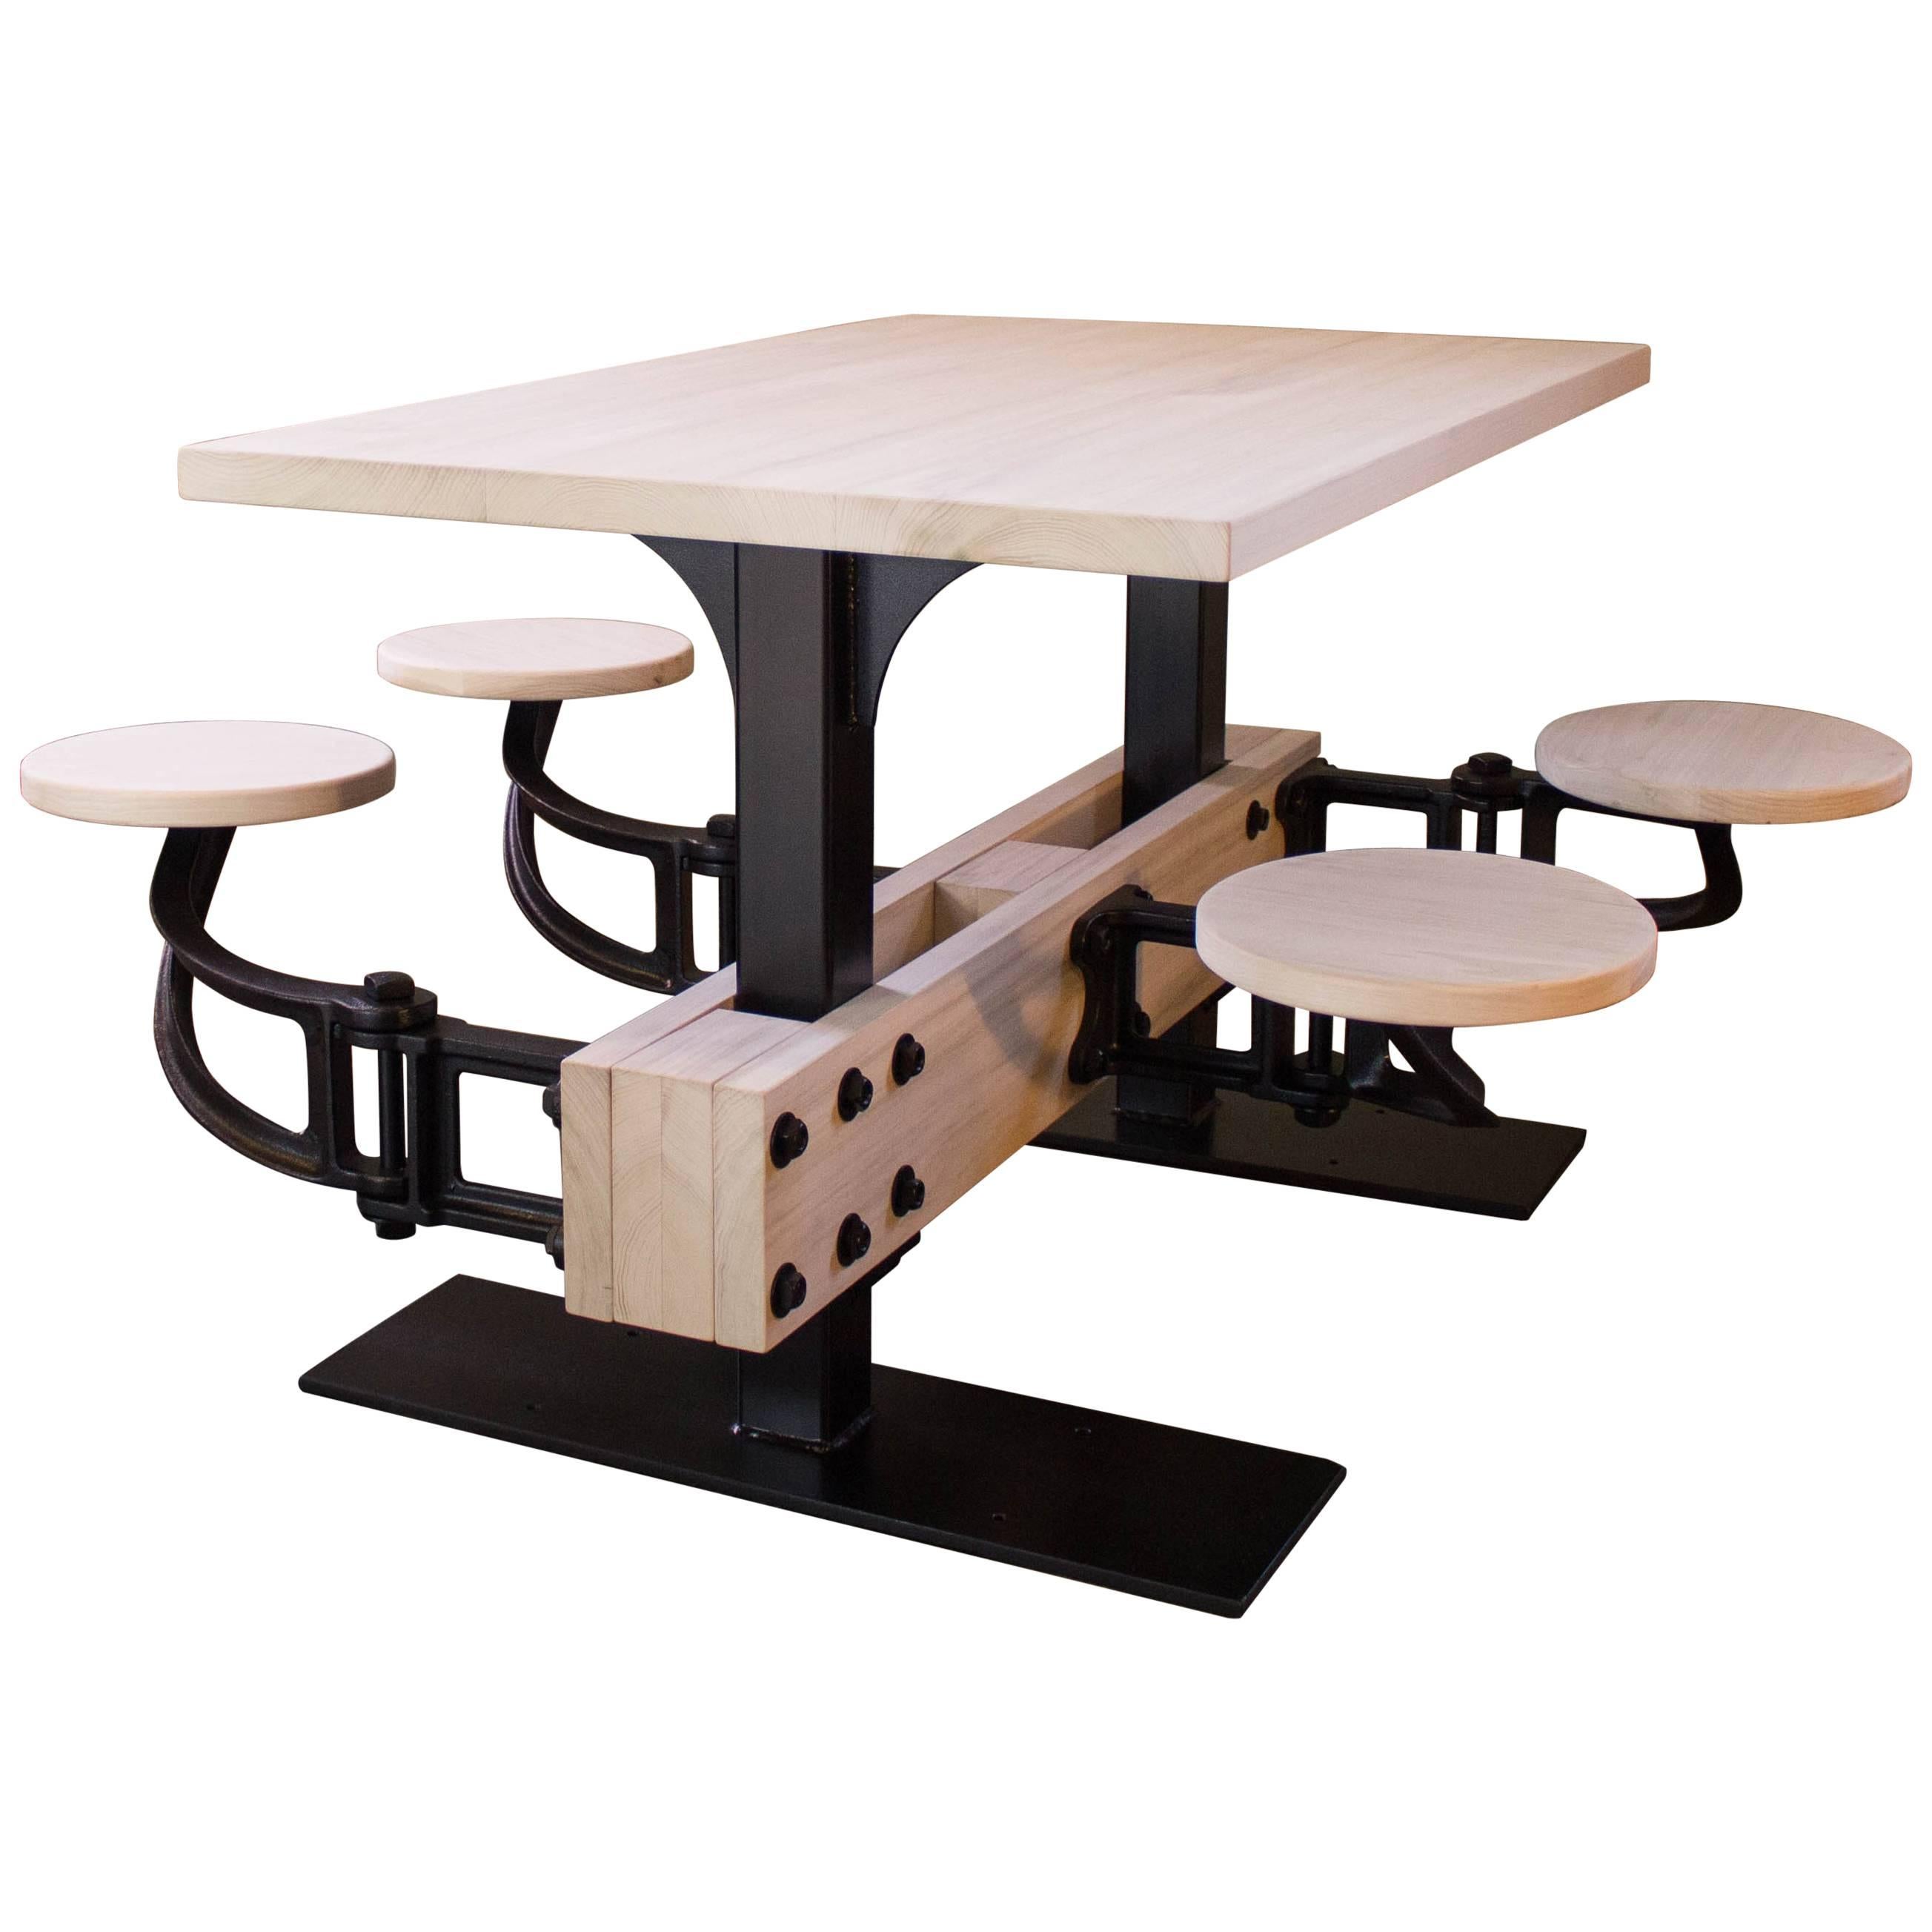 Bespoke Dining Table w Attached Seating - Kitchen Breakfast Dining, Iron & Wood  For Sale